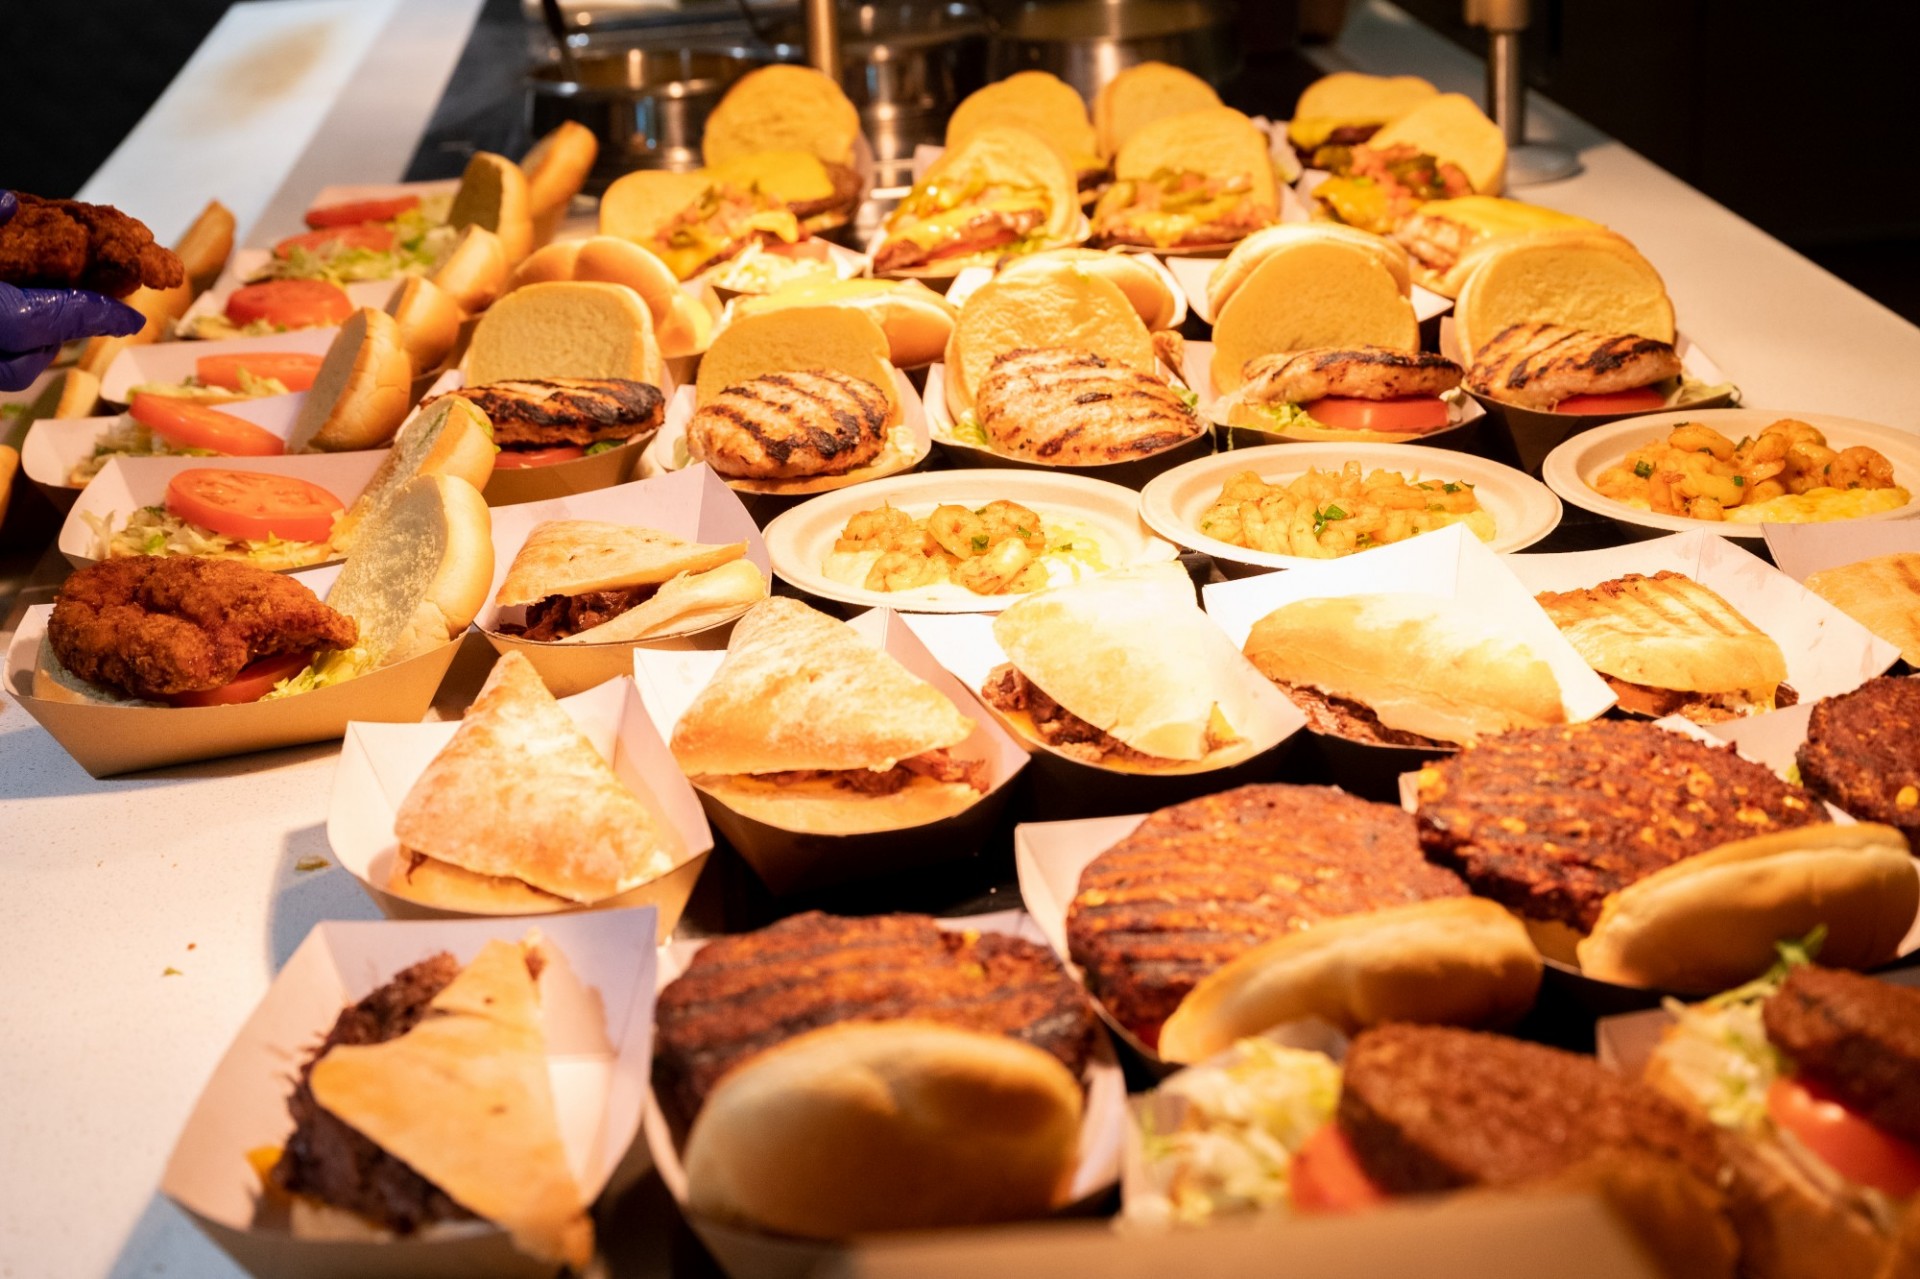 Sandwiches, burgers, and mac and cheese at the grill station